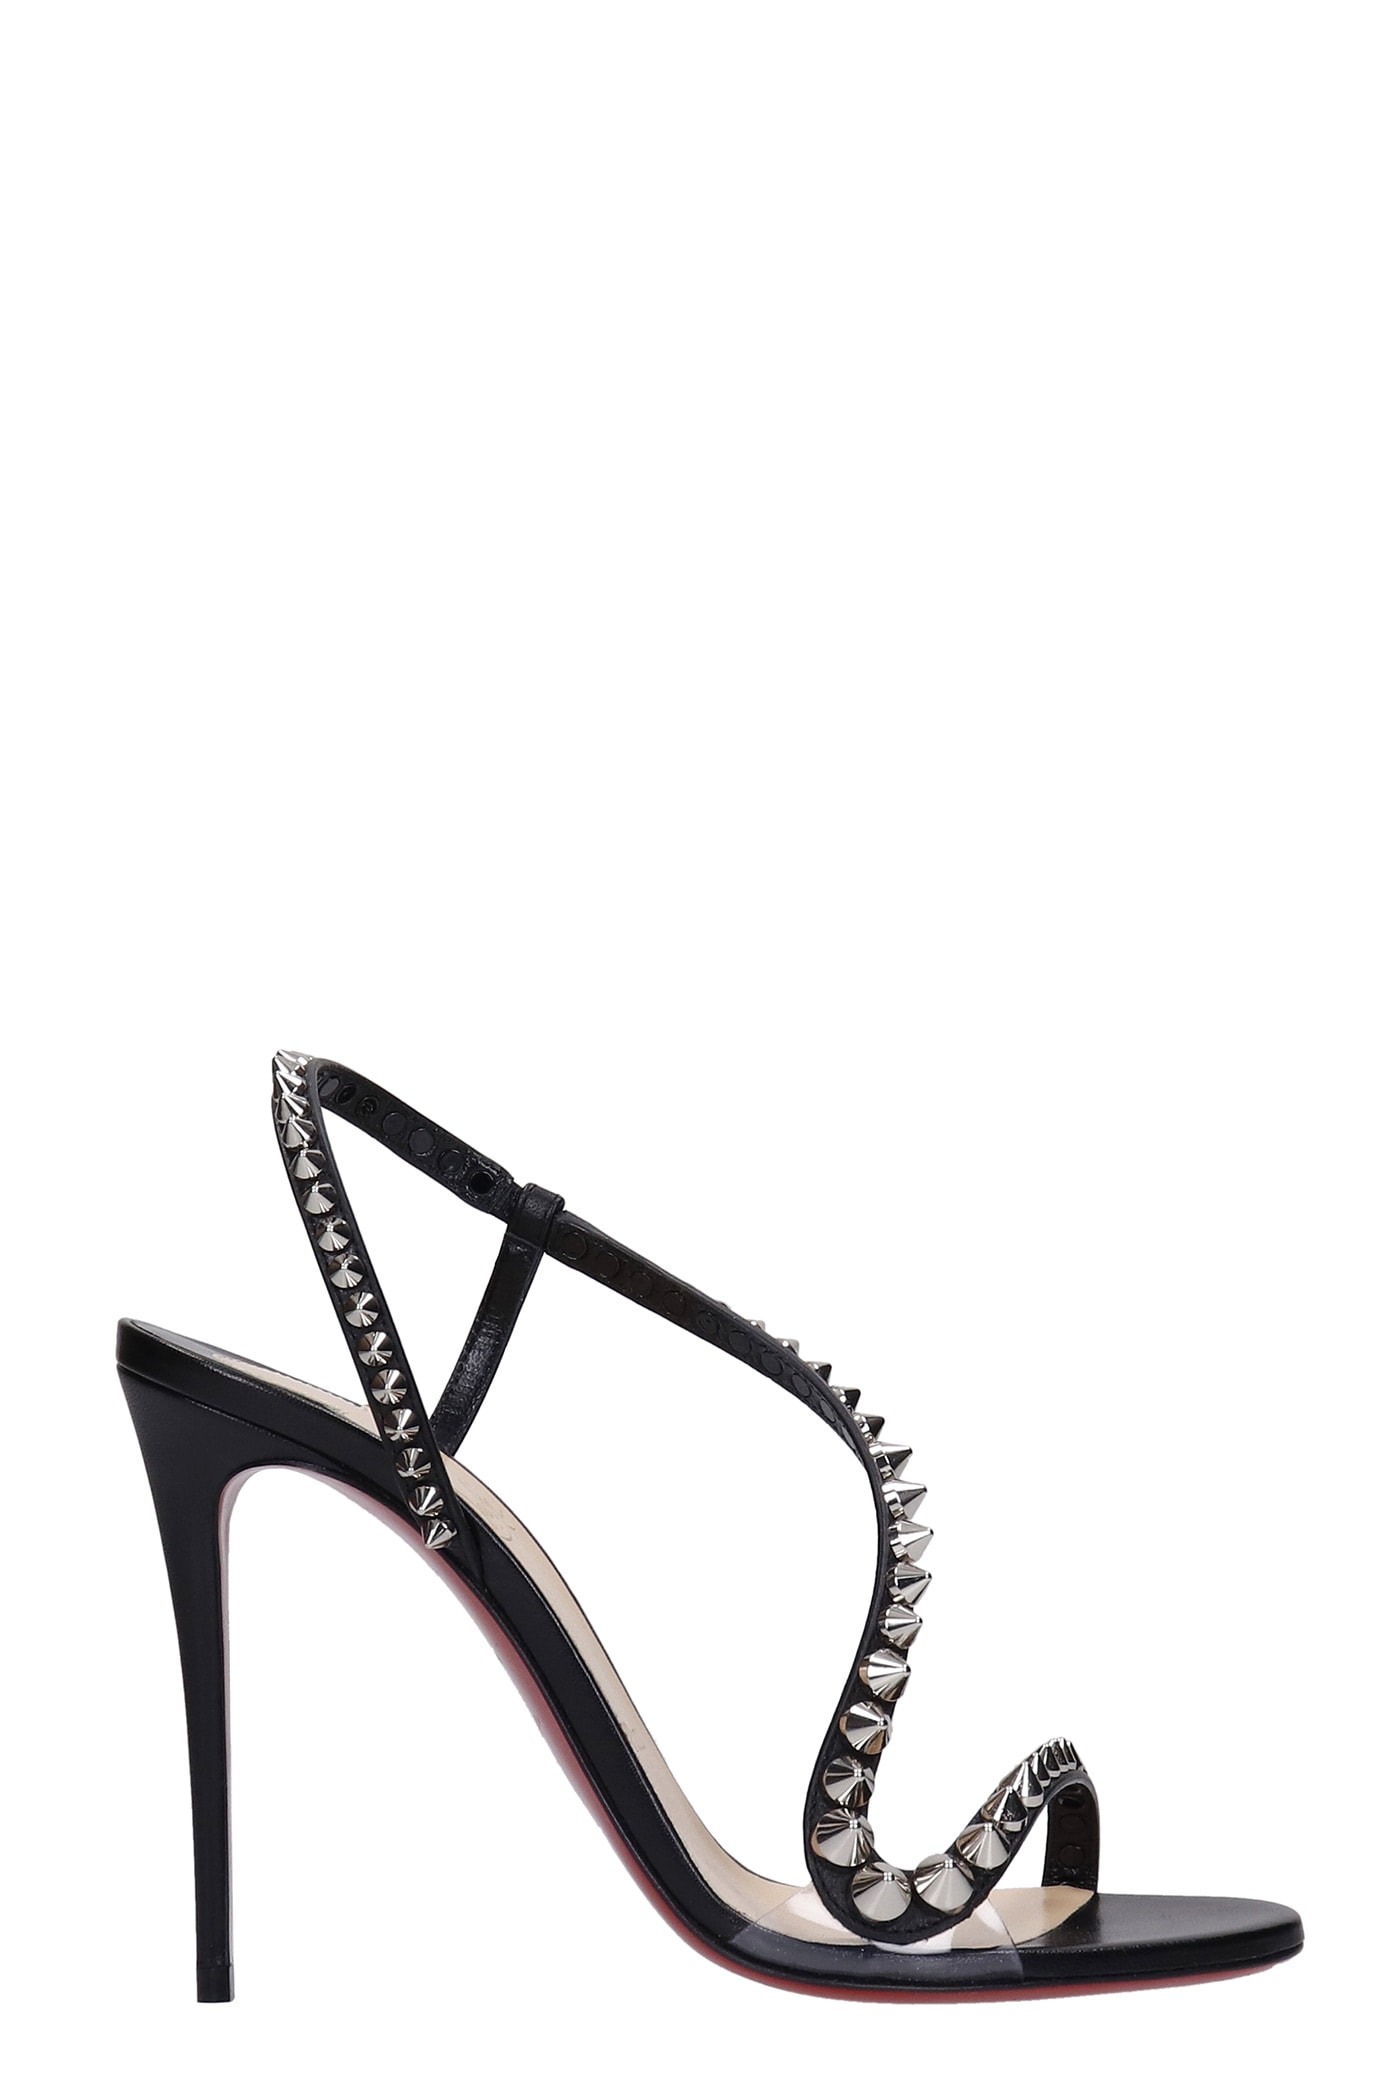 Christian Louboutin Rosalie Spikes Sandals In Black Leather